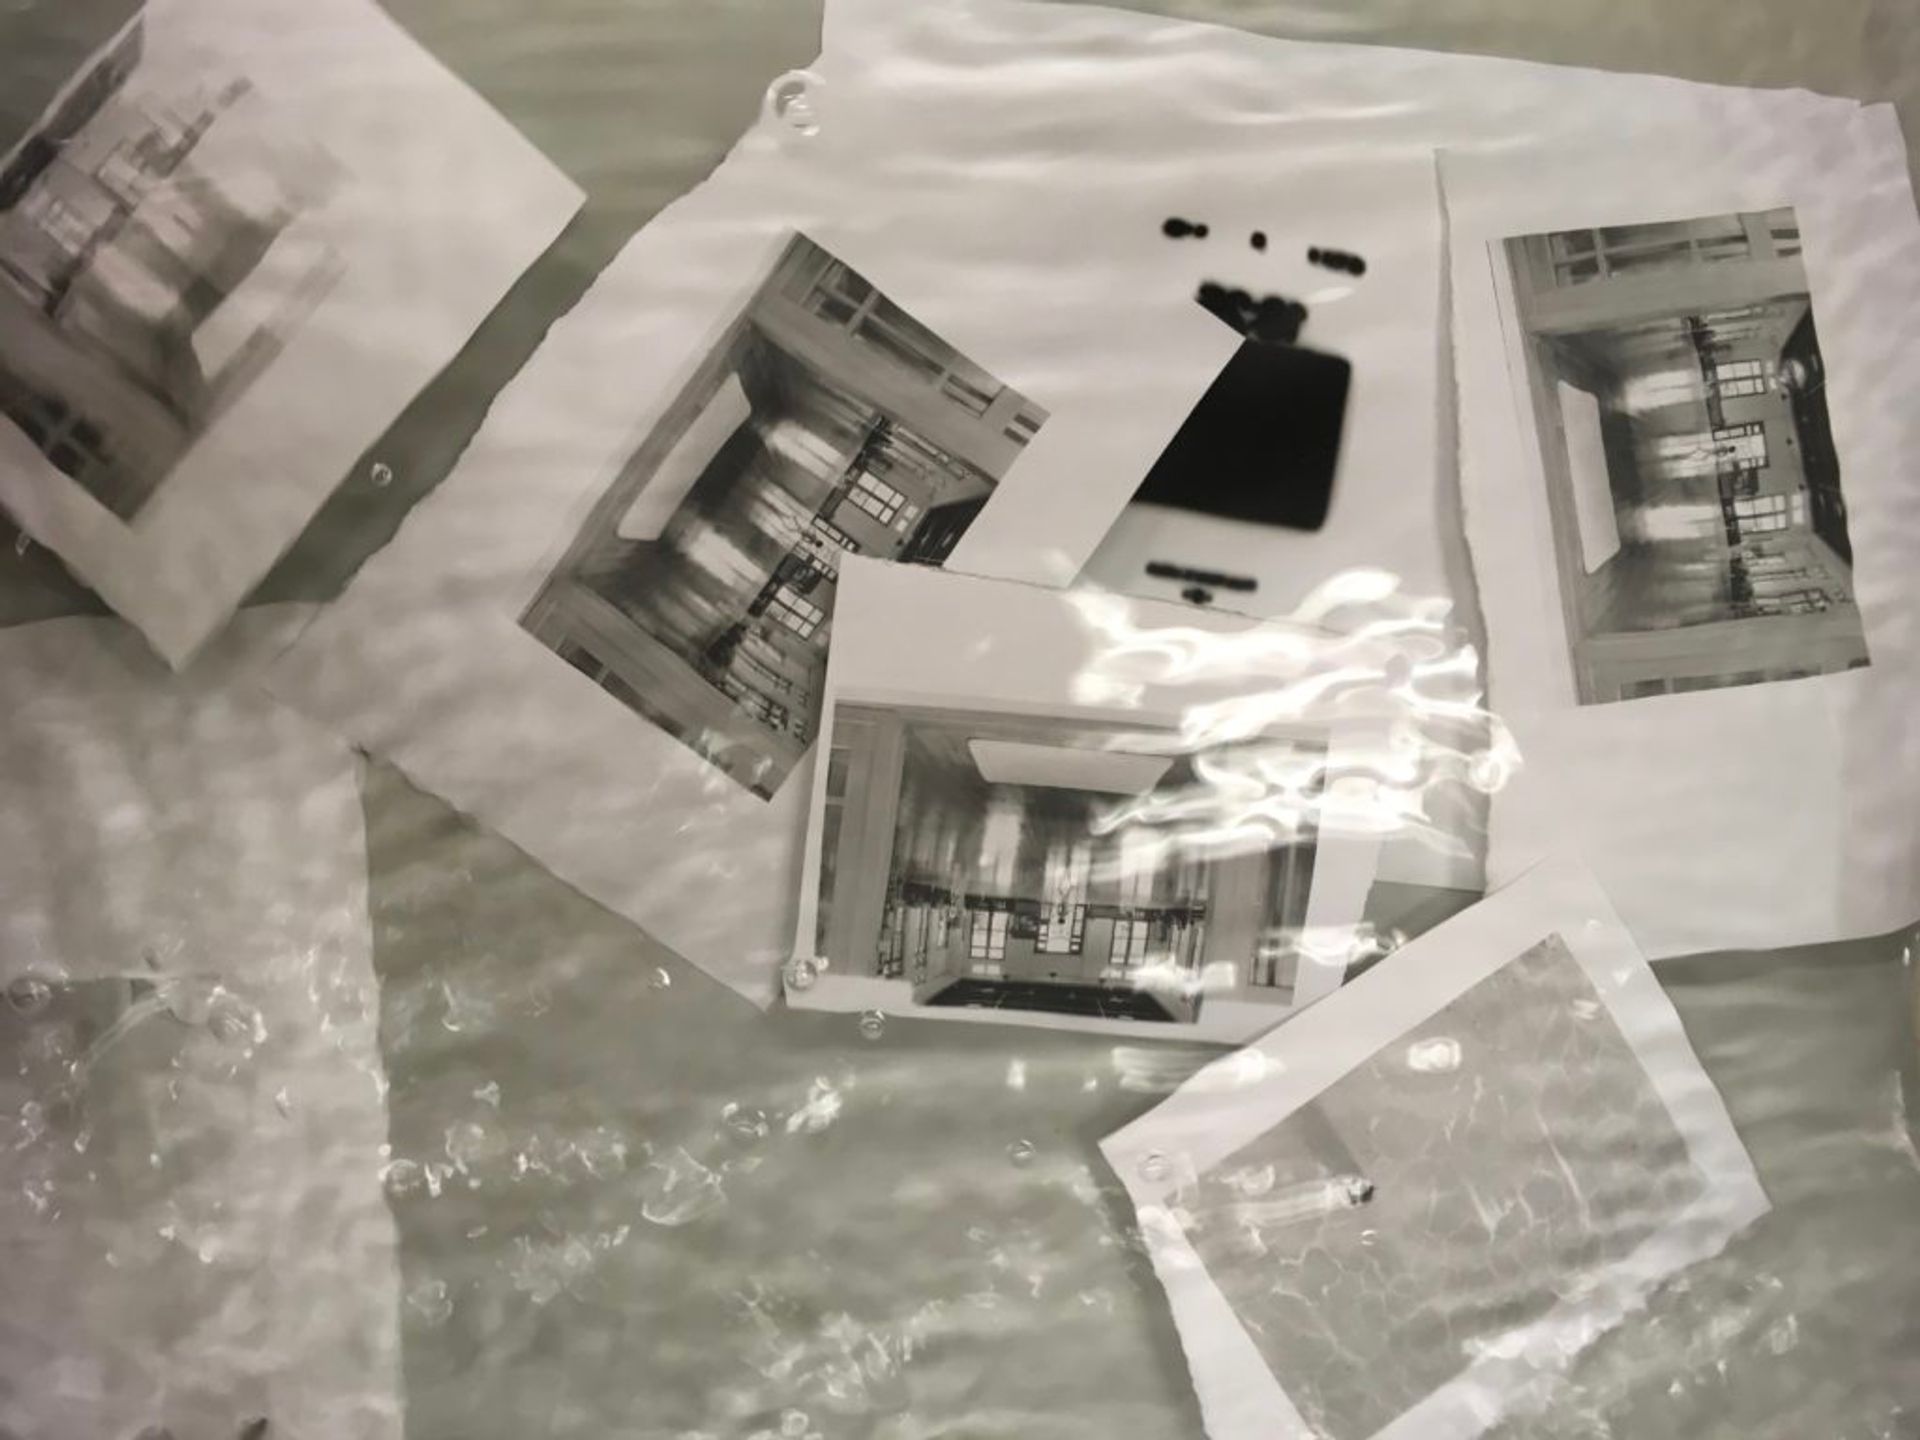 Washing chemicals off black and white prints in the darkroom.